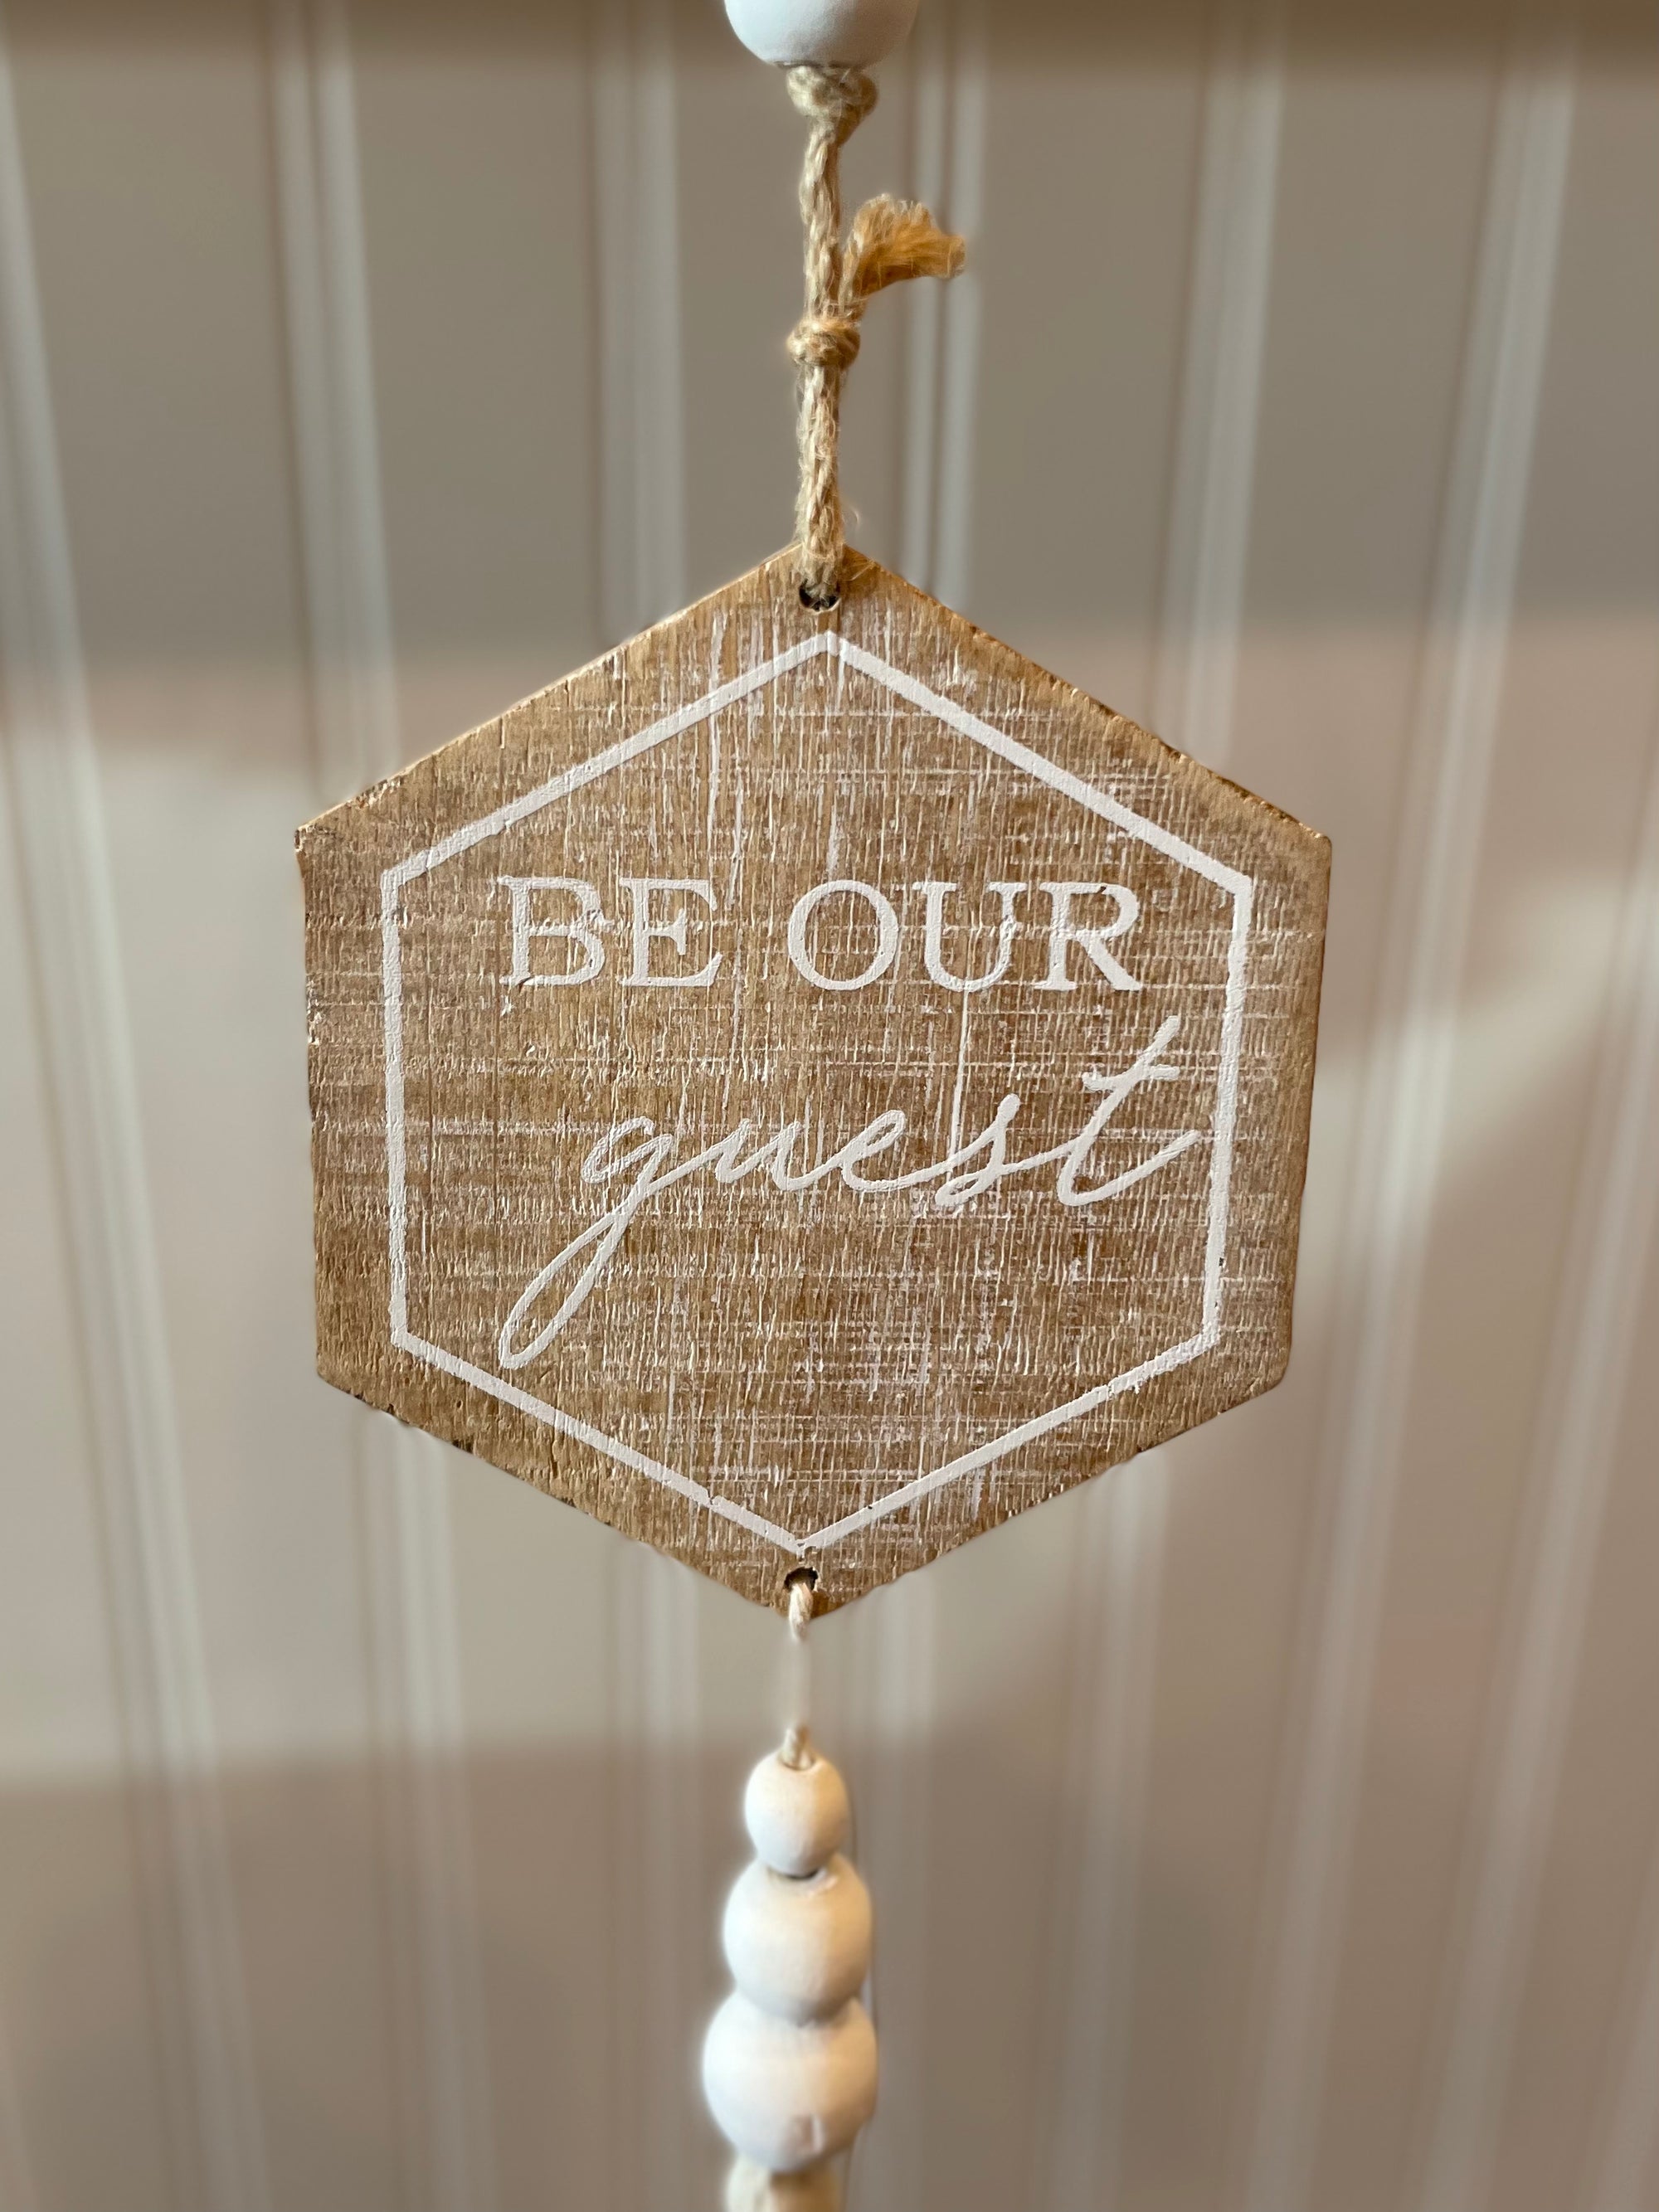 Bead Hanger- Be Our Guest